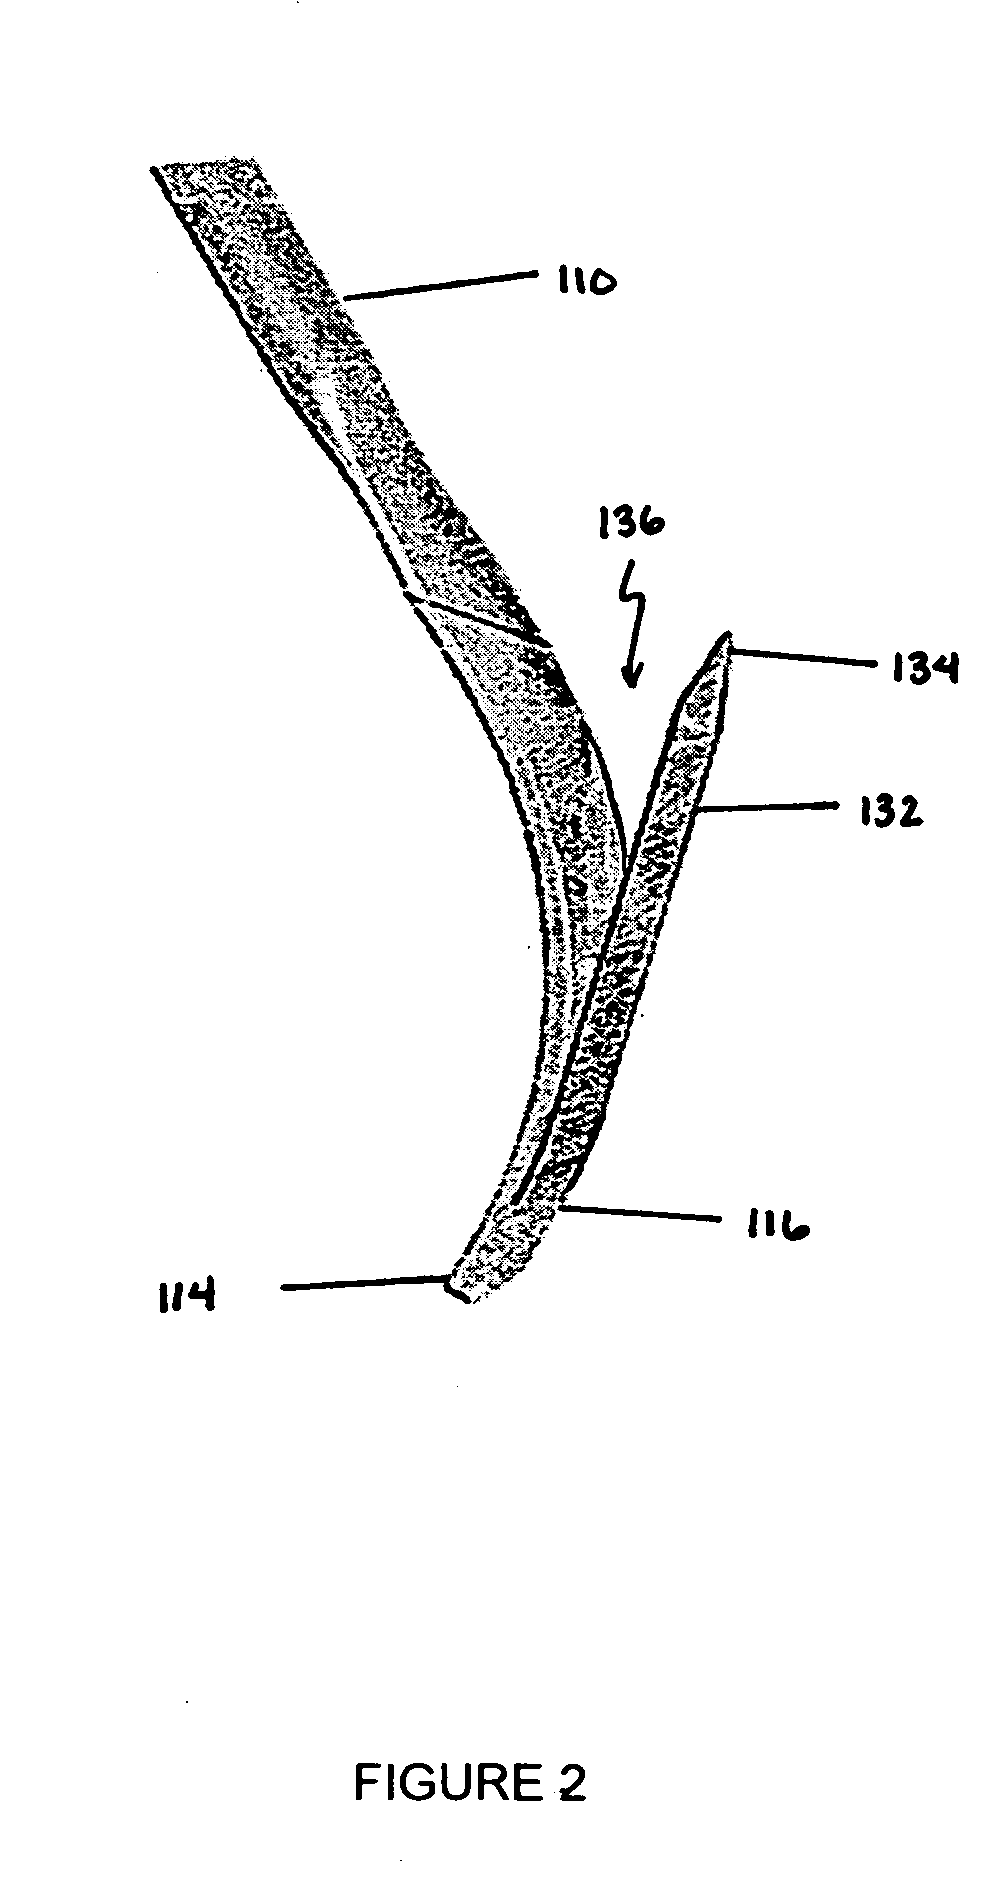 Medical implant device